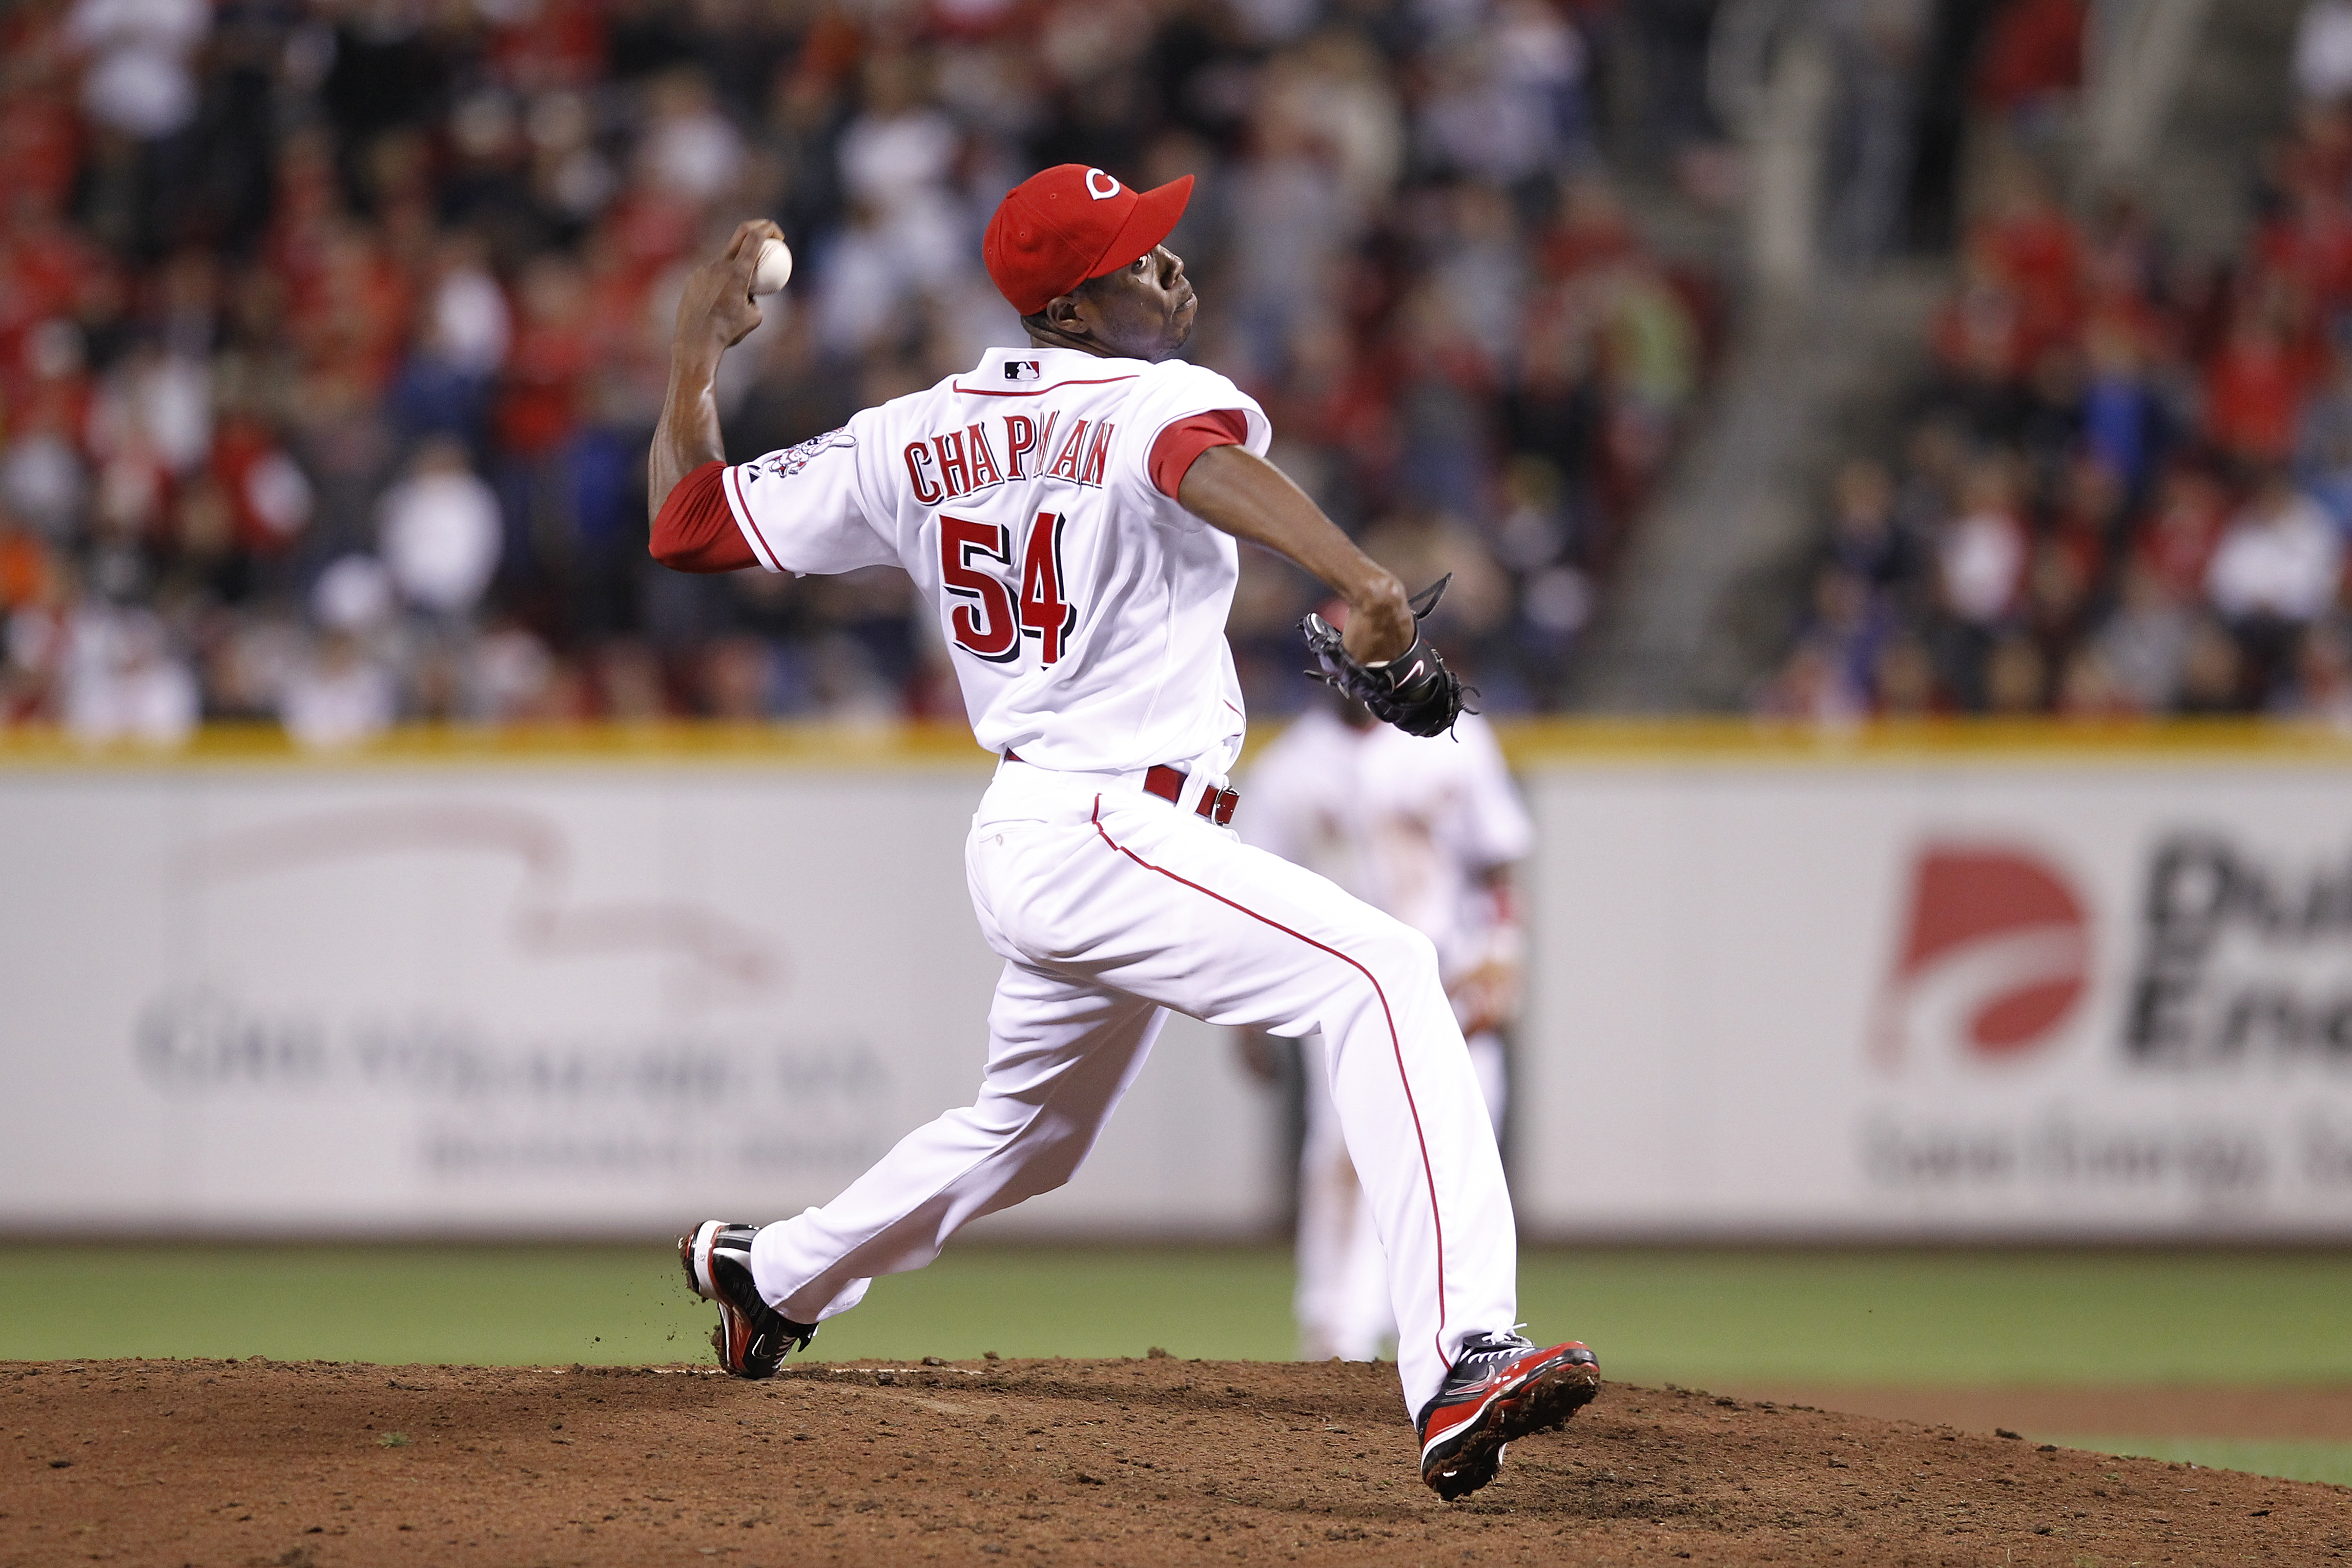 CINCINNATI, OH - SEPTEMBER 28: Aroldis Chapman #54 of the Cincinnati Reds pitches against the Houston Astros at Great American Ball Park on September 28, 2010 in Cincinnati, Ohio. The Reds won 3-2 to clinch the NL Central Division title. (Photo by Joe Rob